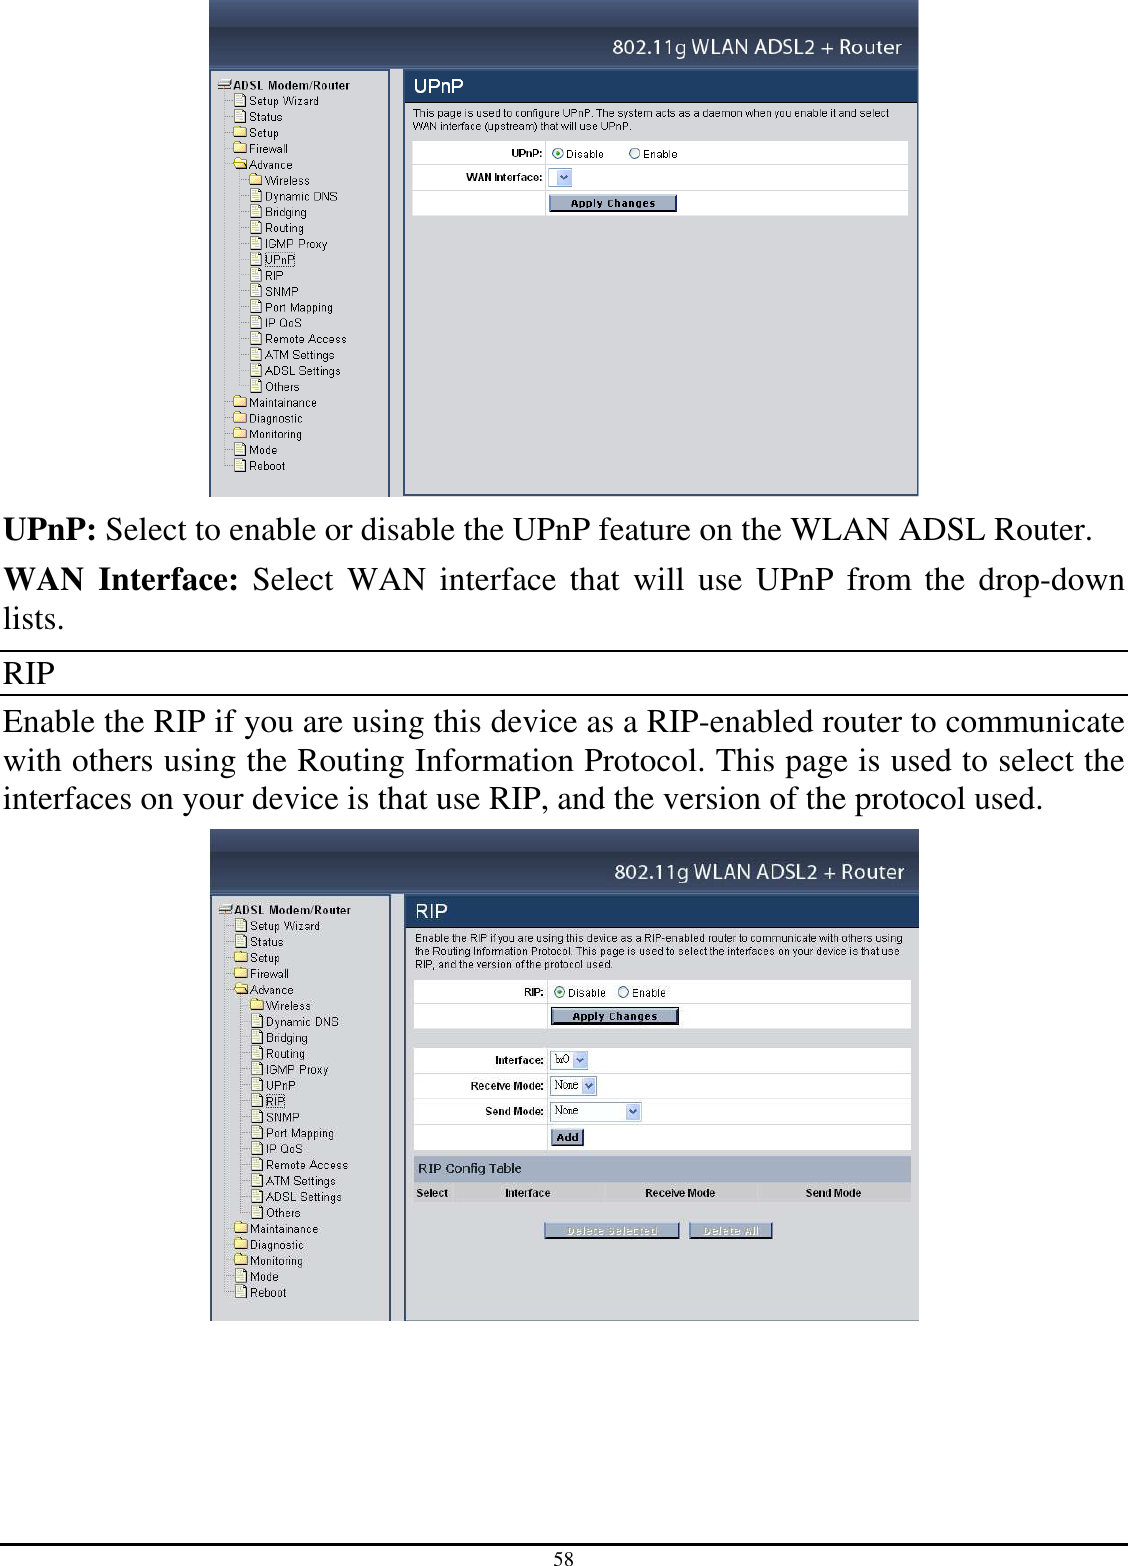 58  UPnP: Select to enable or disable the UPnP feature on the WLAN ADSL Router. WAN  Interface:  Select  WAN interface that  will  use  UPnP  from the drop-down lists. RIP Enable the RIP if you are using this device as a RIP-enabled router to communicate with others using the Routing Information Protocol. This page is used to select the interfaces on your device is that use RIP, and the version of the protocol used.  